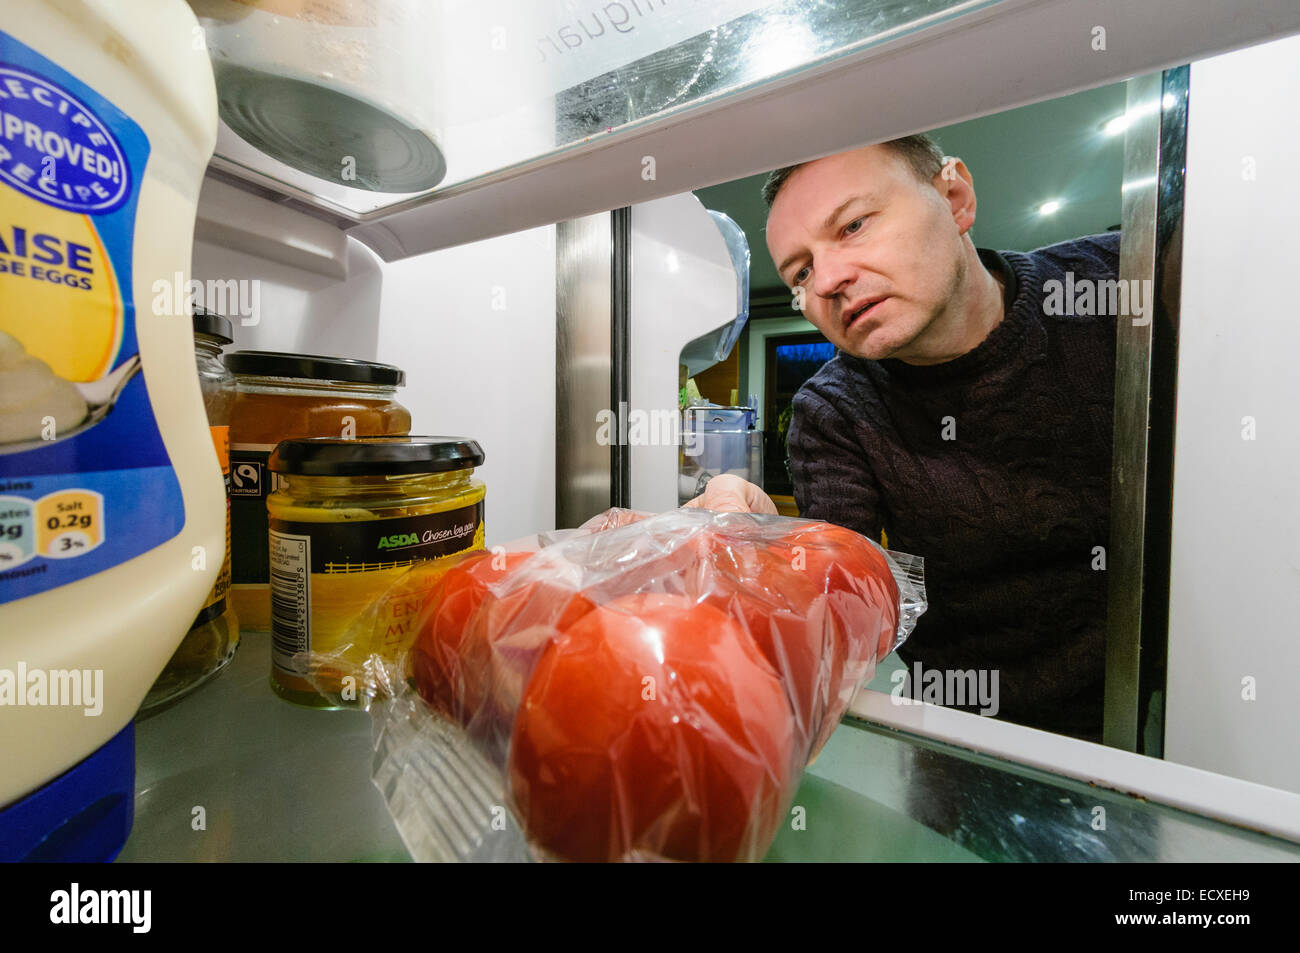 Man takes a packet of tomatoes from a refrigerator Stock Photo